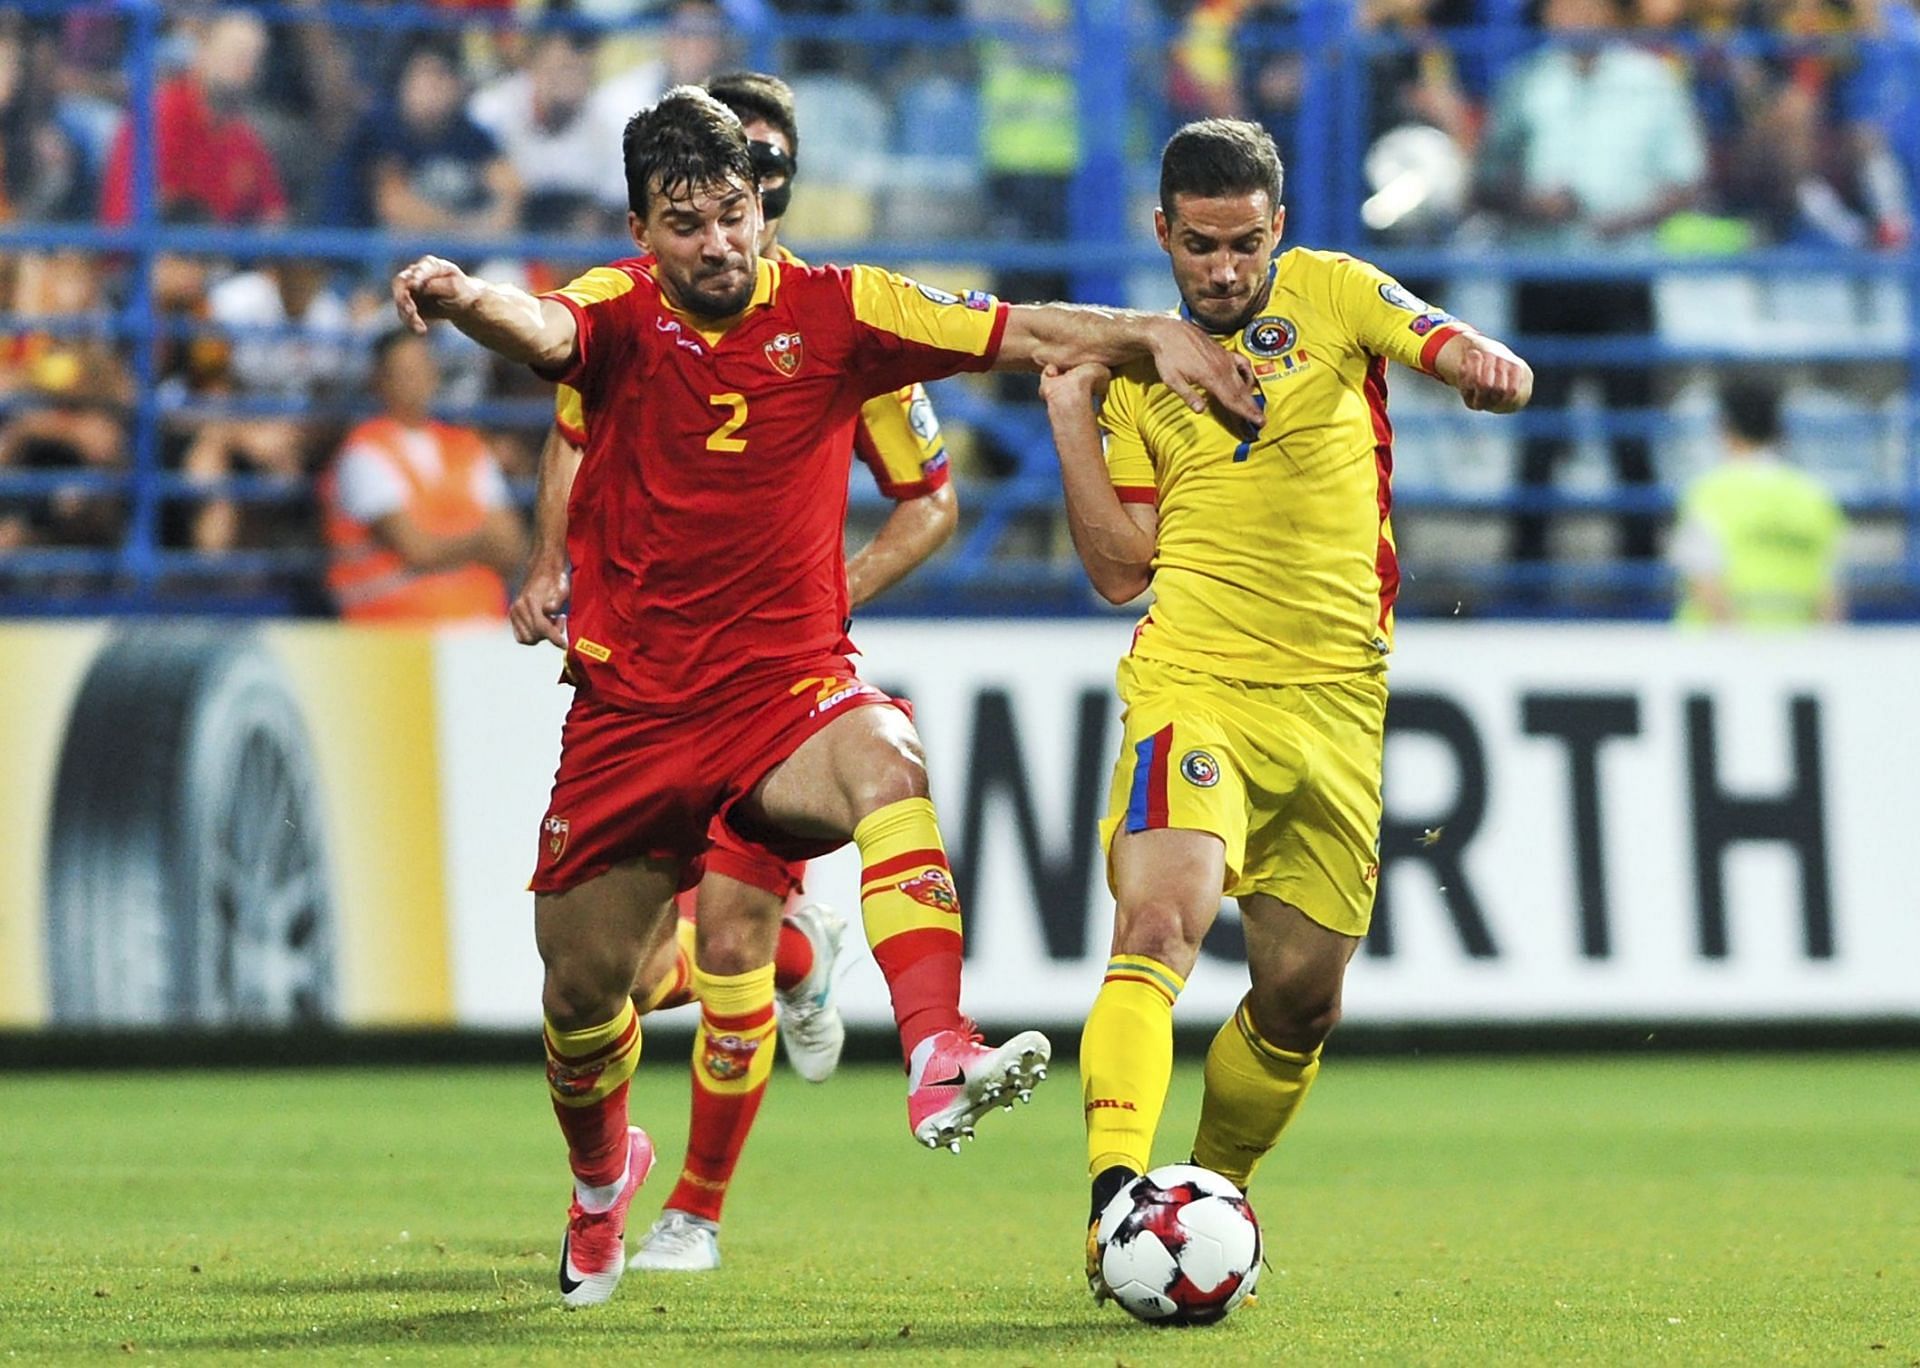 Romania square off against Montenegro on Tuesday